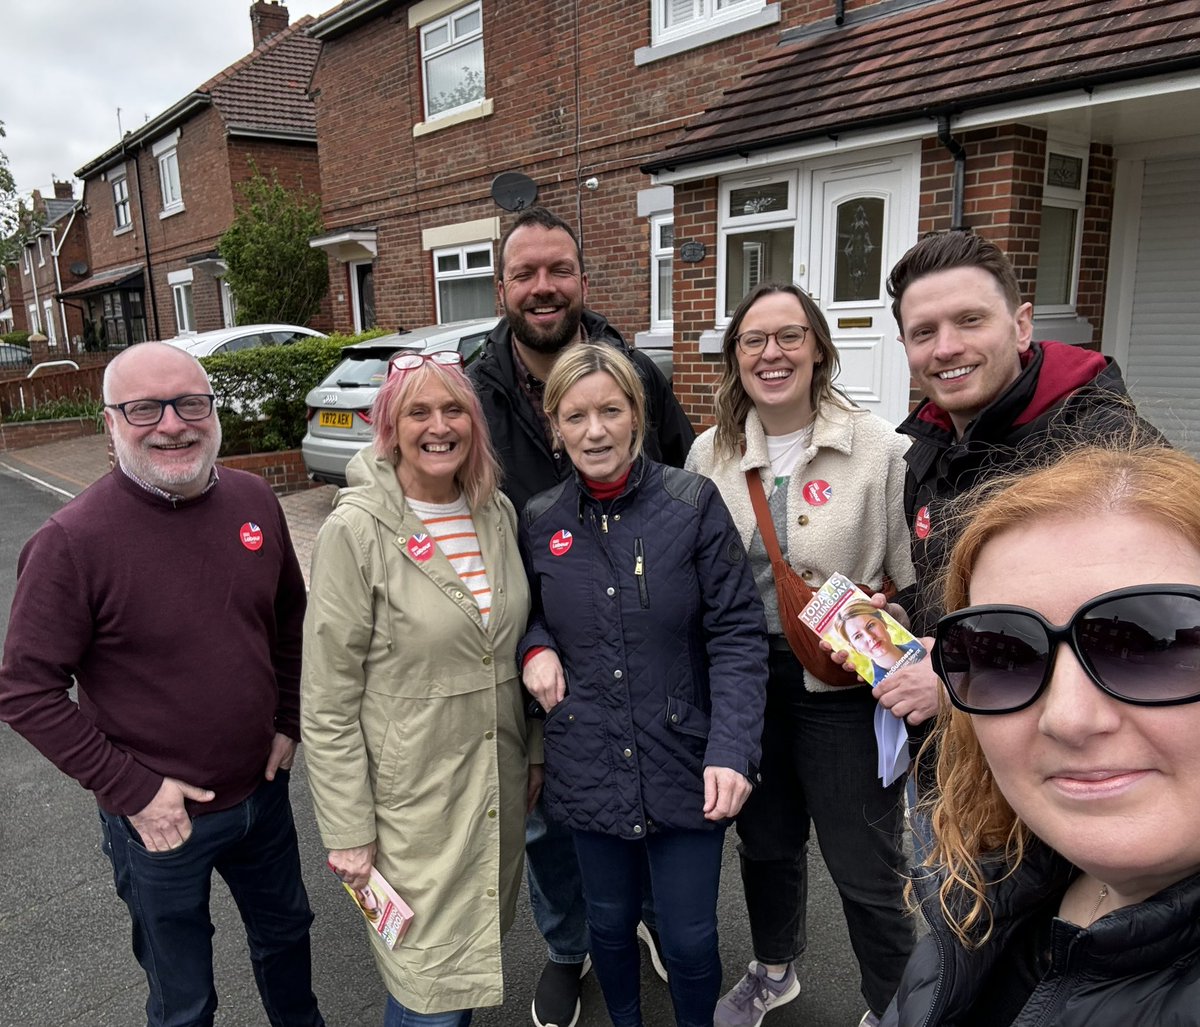 Quick round in Dunston then on to Lobley Hill. Don’t ask why my eyes are closed but everyone else looks nice in this photo #votelabour